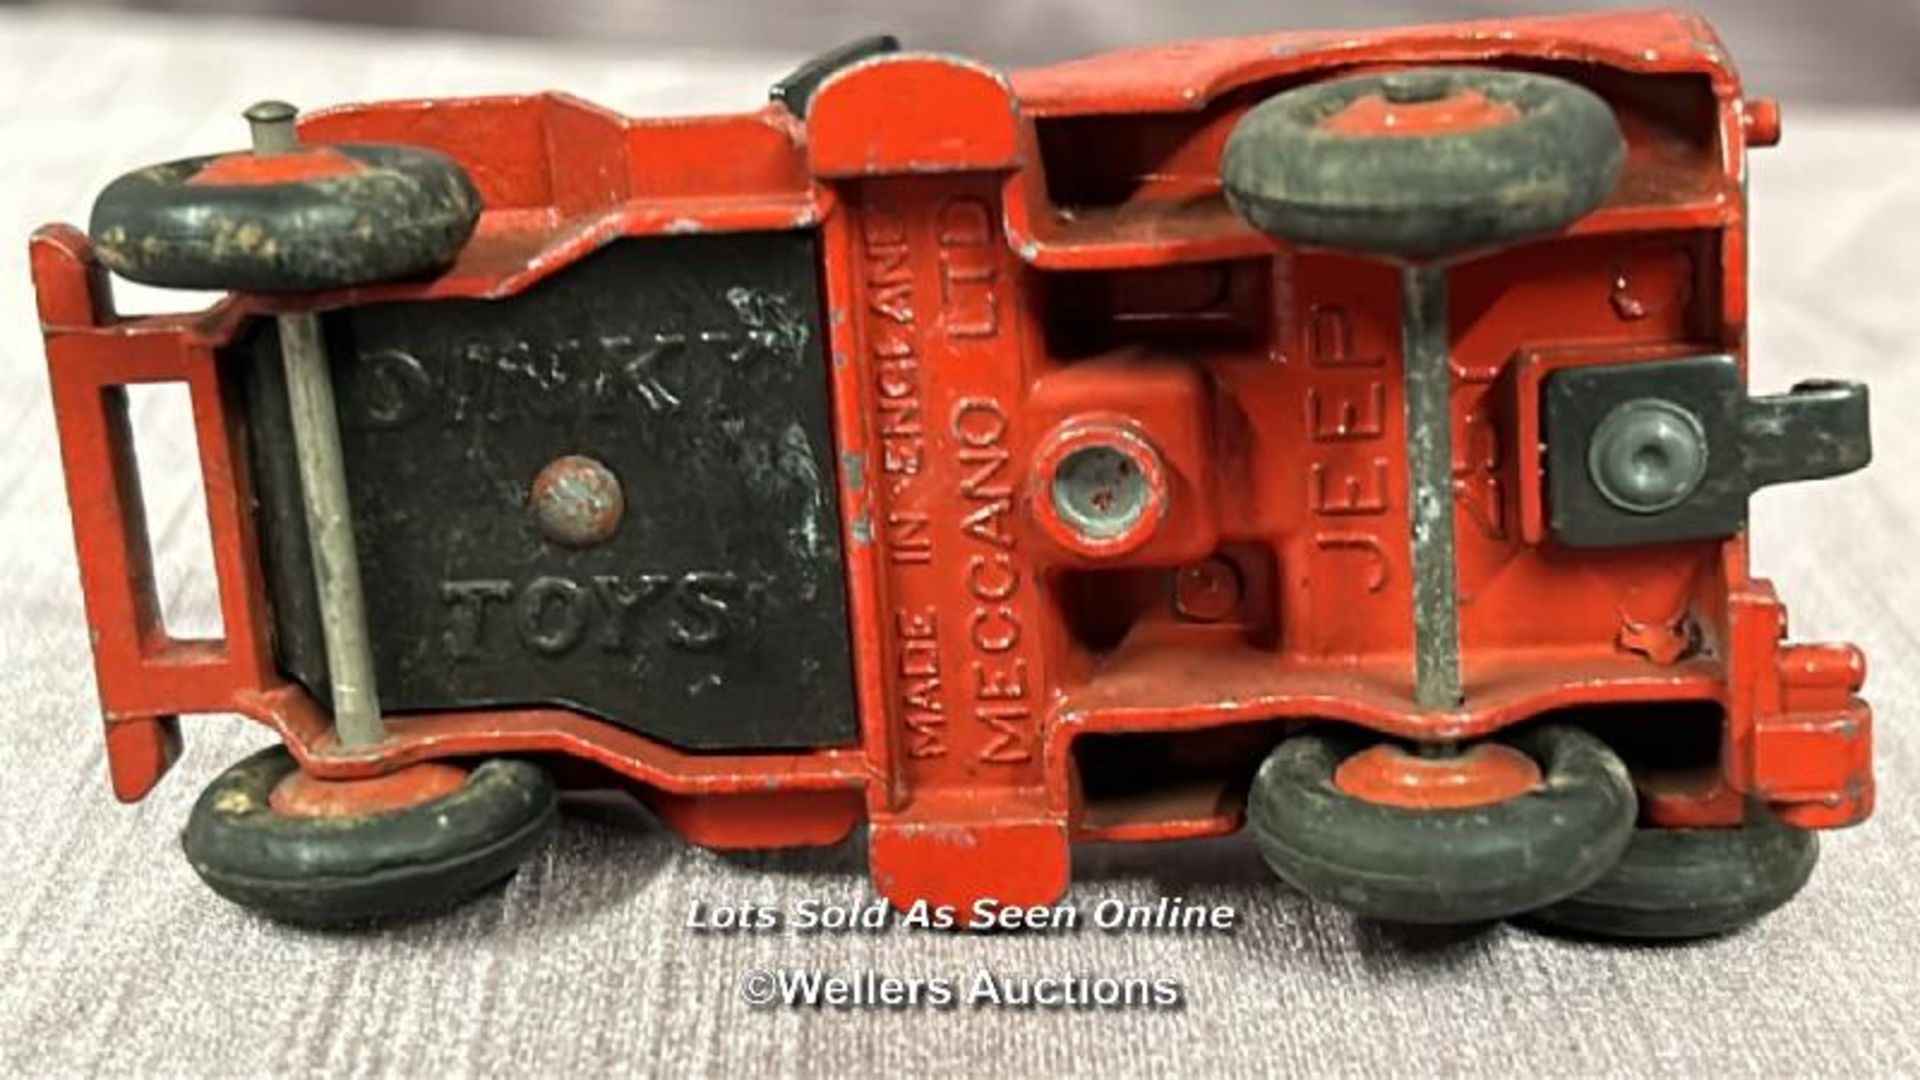 TWO DINKY DIE CAST CARS INCLUDING PACKARD NO. 132 AND JEEP NO. 25Y - Image 7 of 7